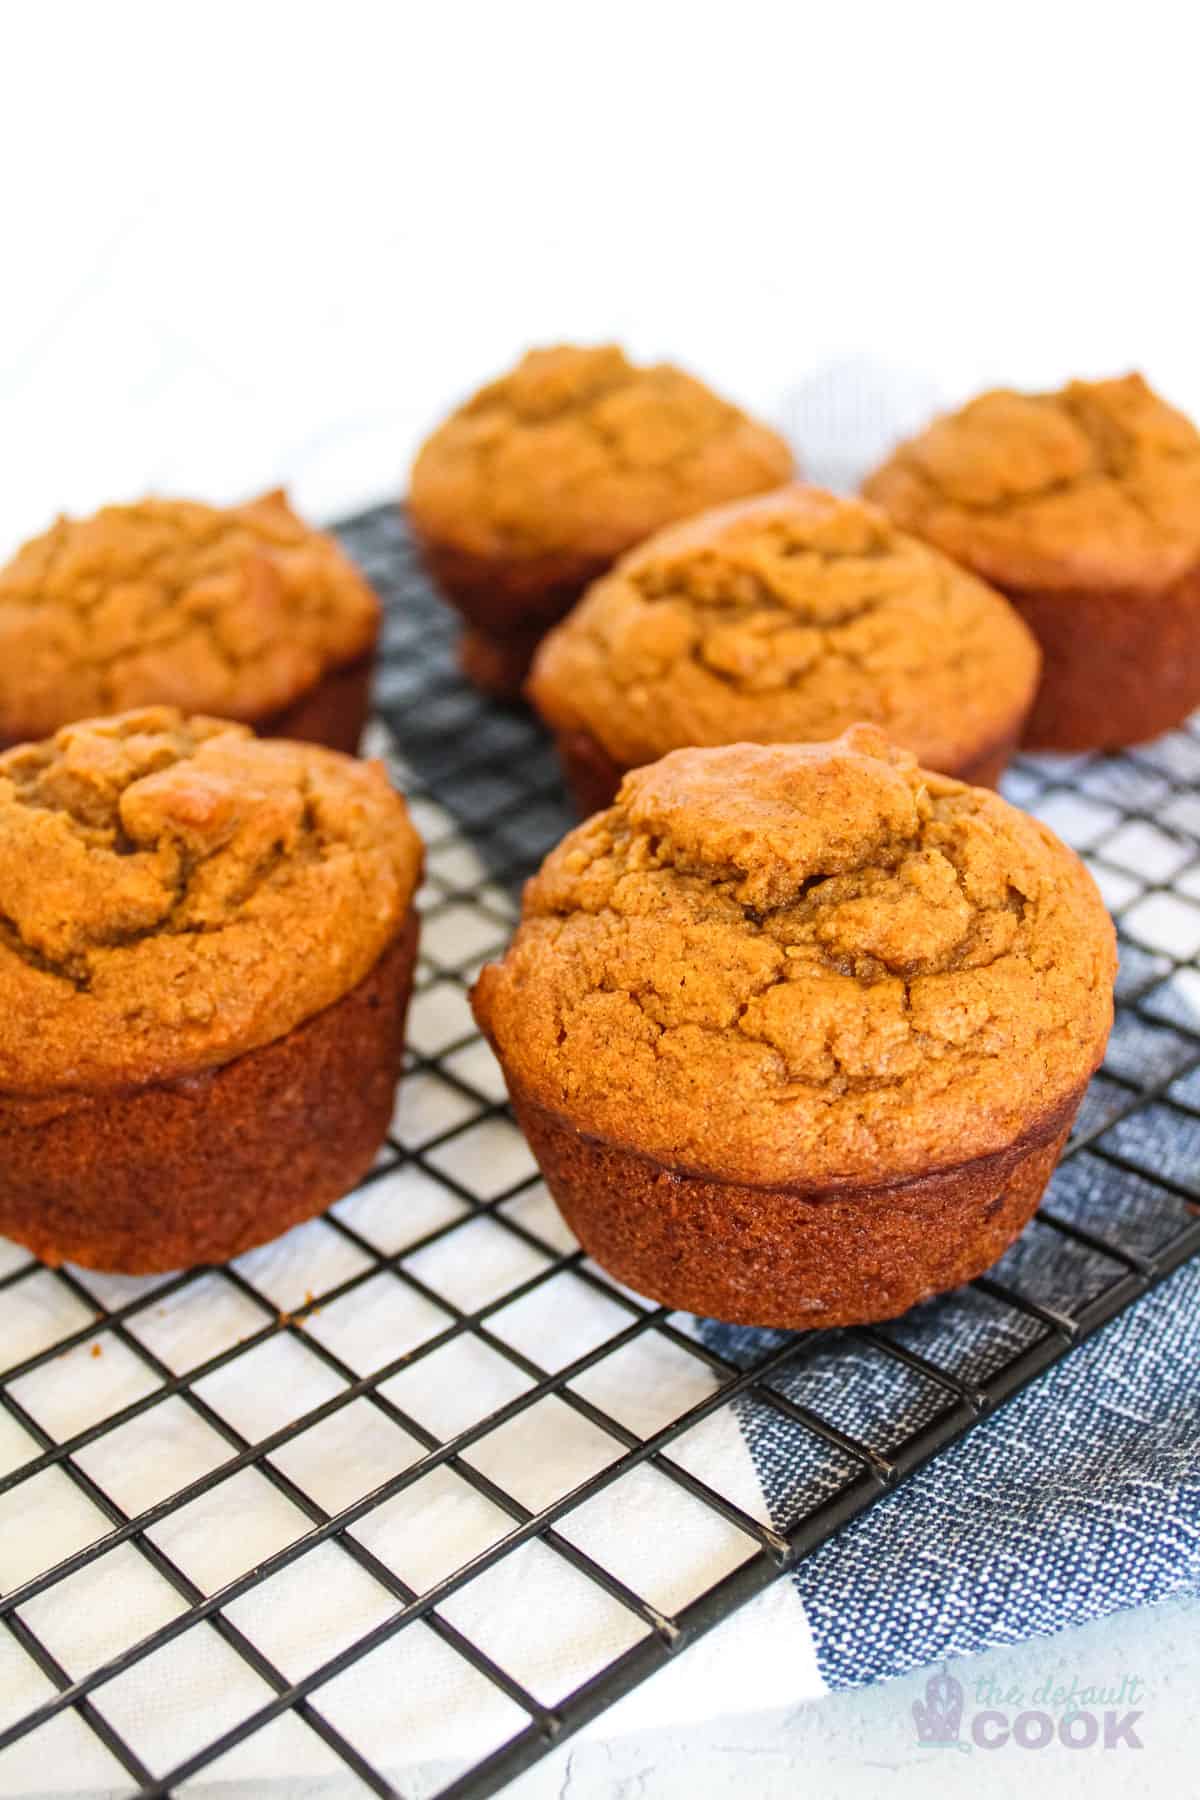 Six sweet potato muffins on a wire rack on top of a kitchen towel.